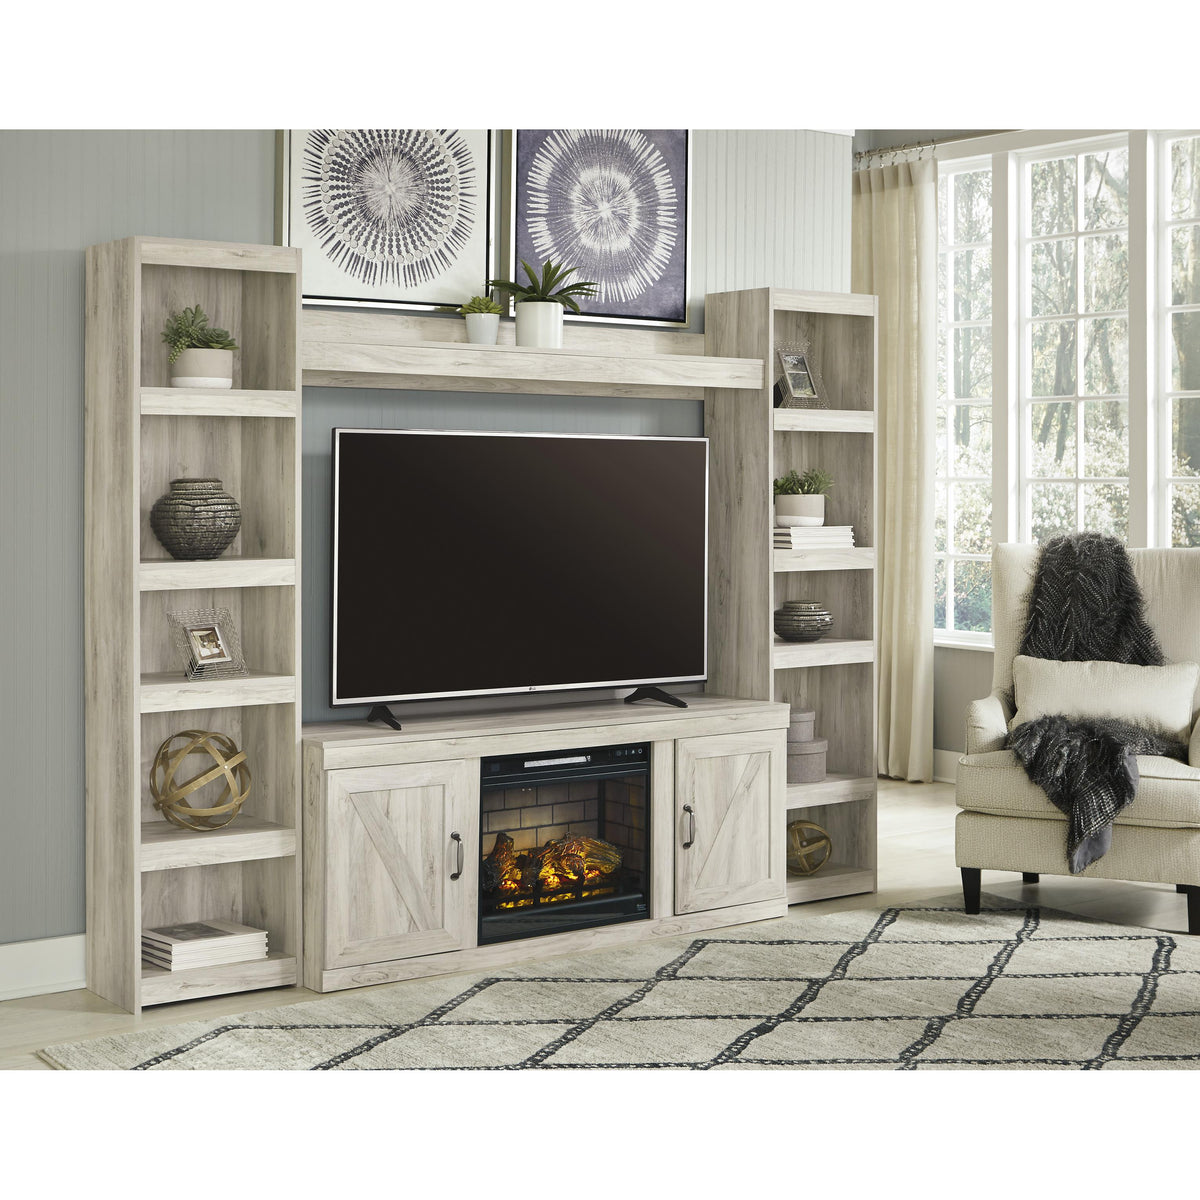 Signature Design by Ashley Bellaby EW0331W8 4 pc Entertainment Center with Electric Fireplace